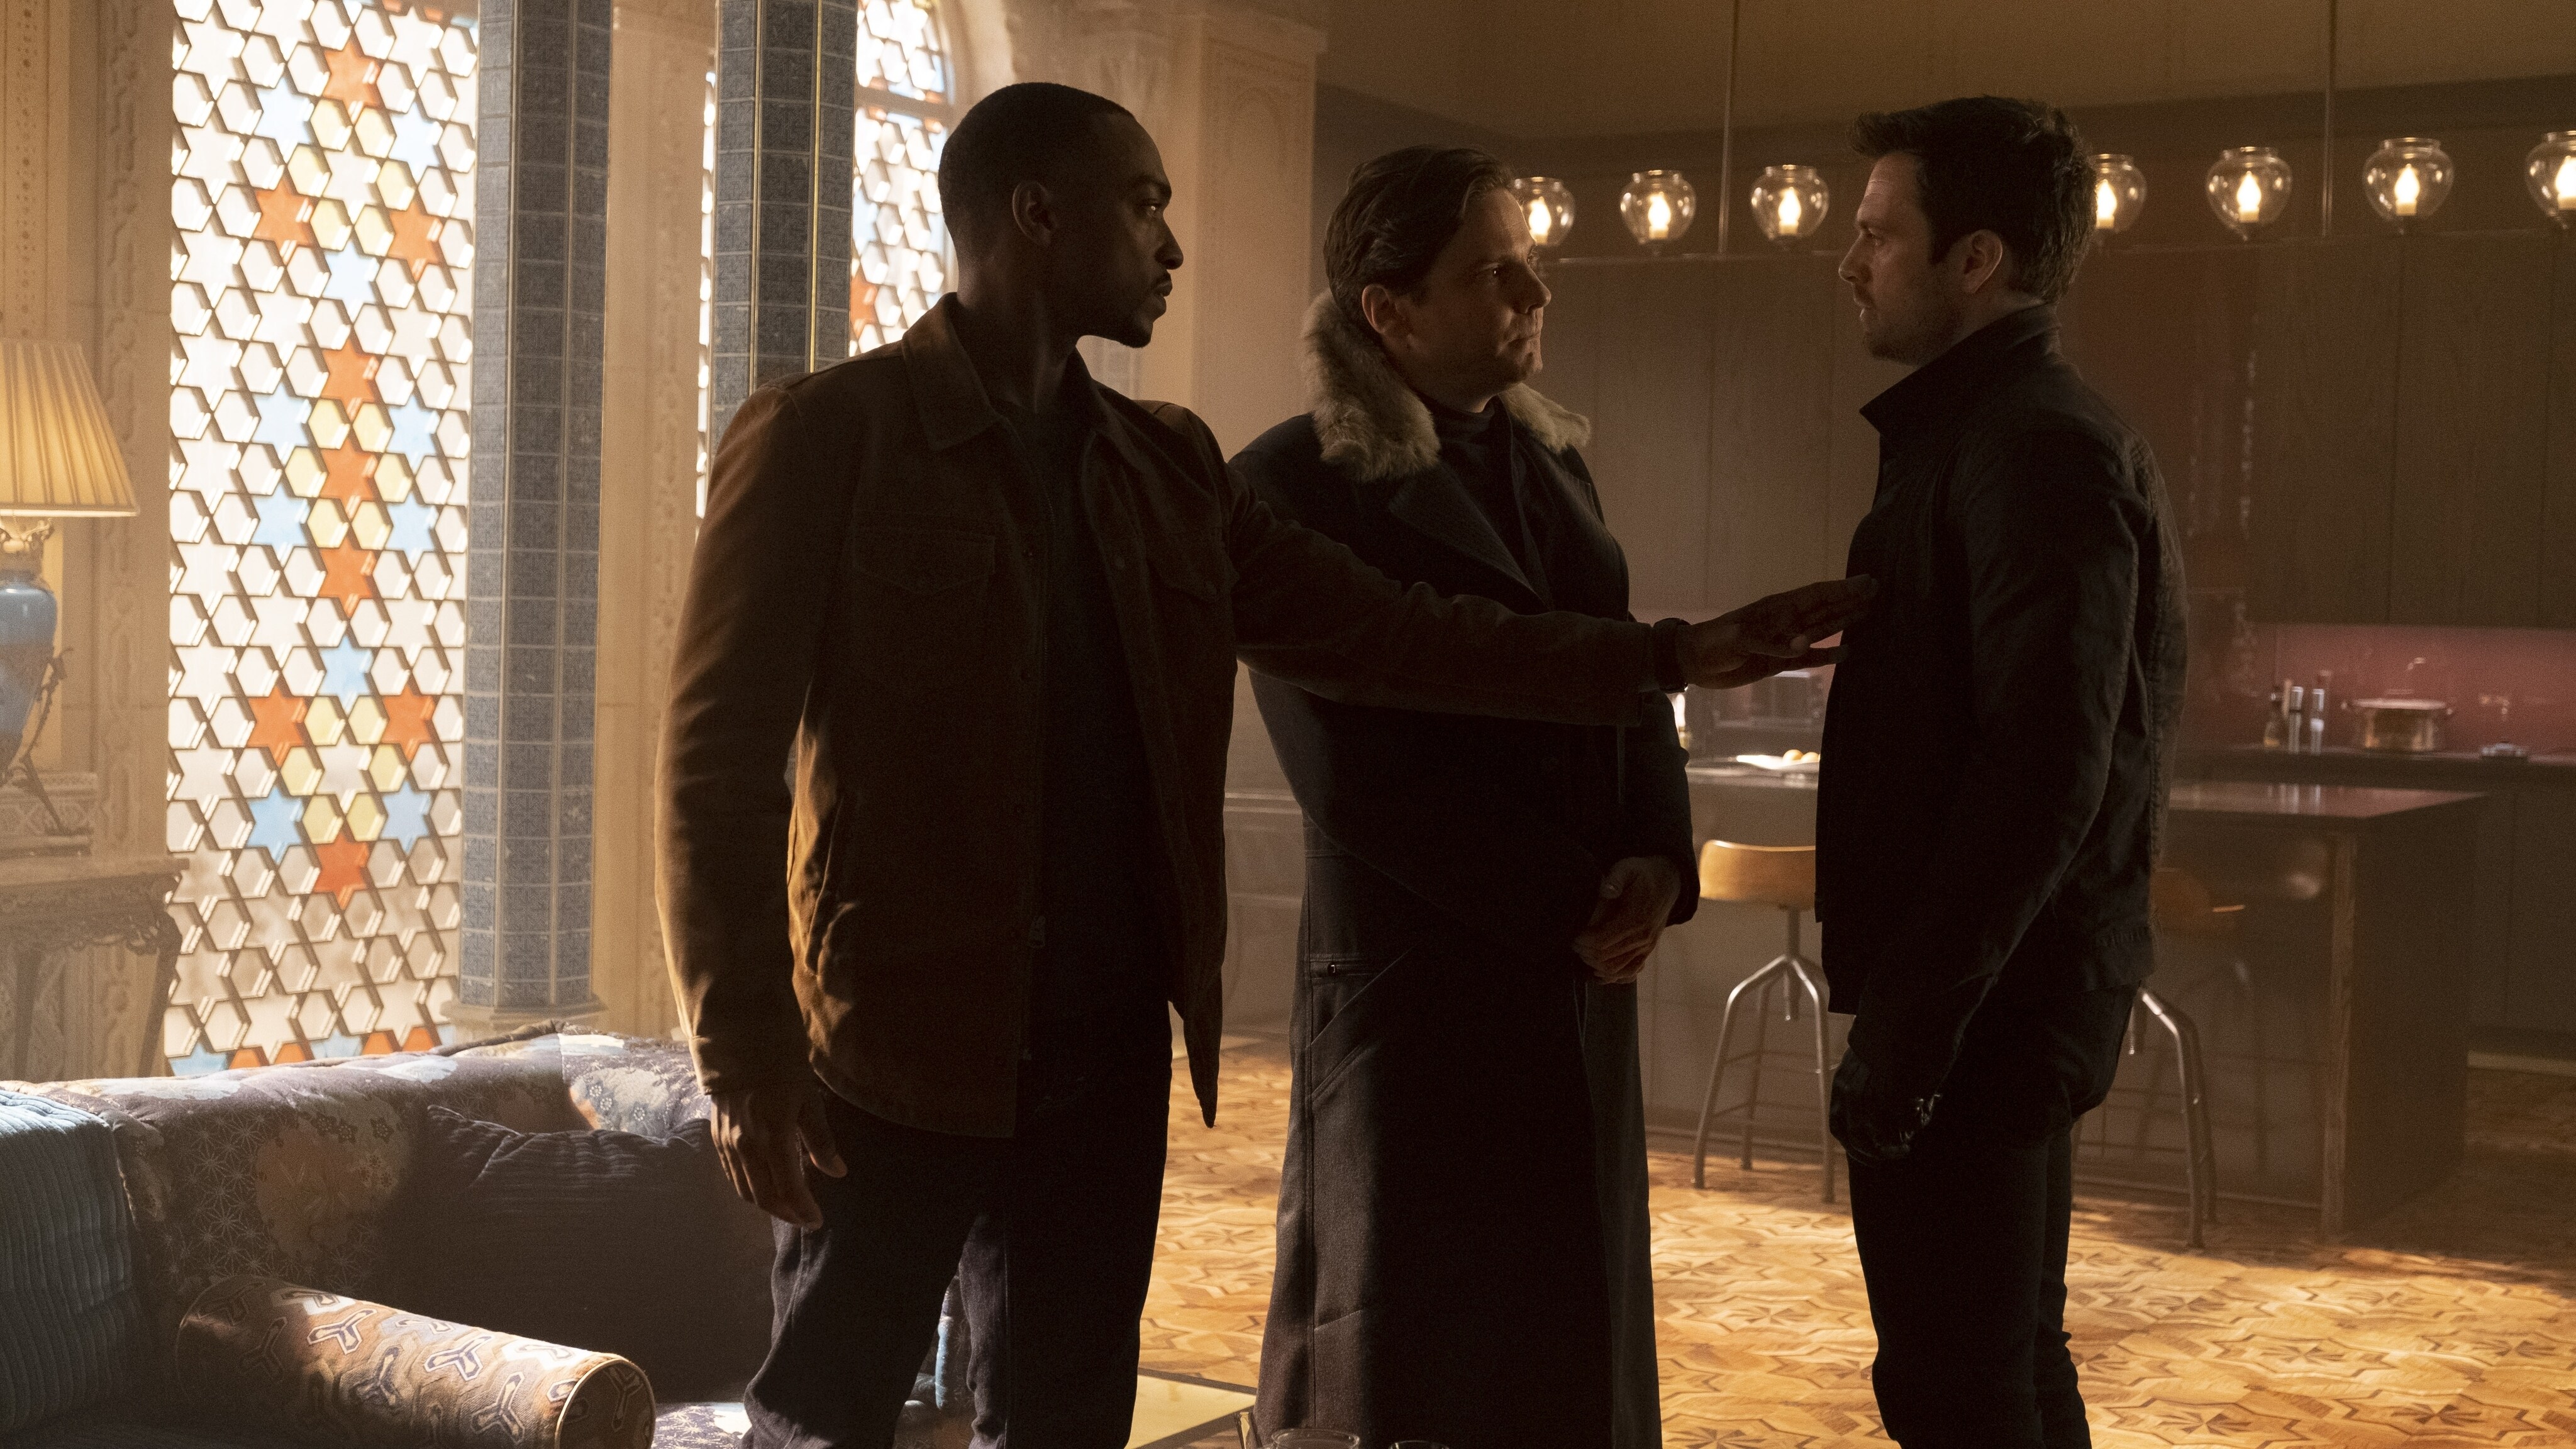 (L-R): Falcon/Sam Wilson (Anthony Mackie), Zemo (Daniel Brühl) and Winter Soldier/Bucky Barnes (Sebastian Stan) in Marvel Studios' THE FALCON AND THE WINTER SOLDIER exclusively on Disney+. Photo by Chuck Zlotnick. ©Marvel Studios 2021. All Rights Reserved.